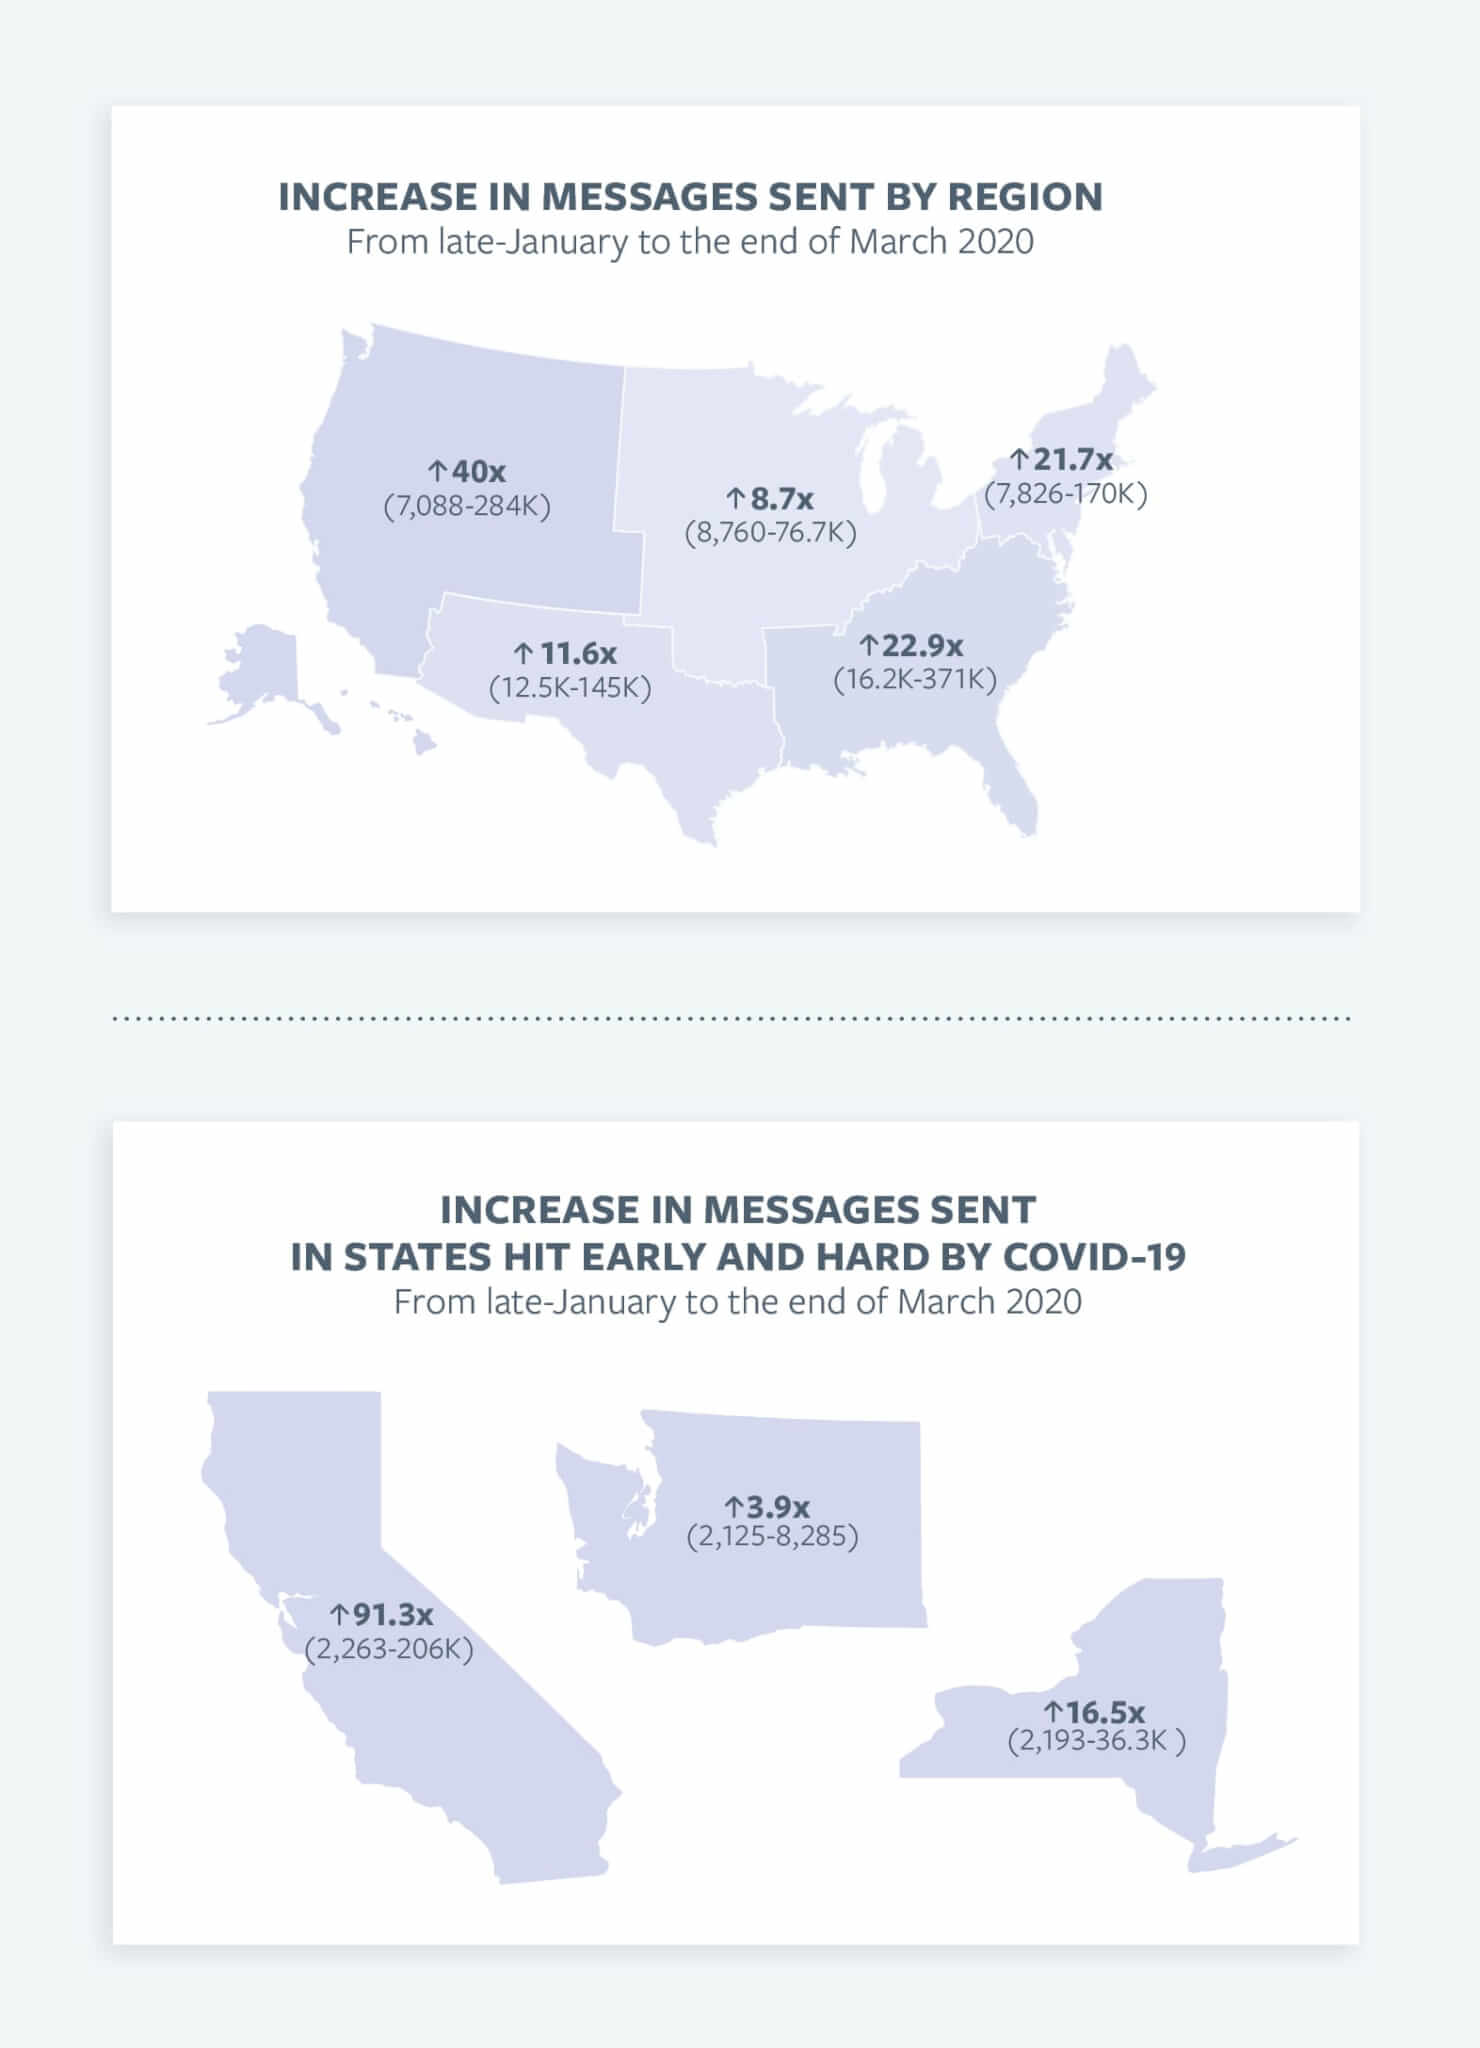 Volume of proactive communication messages sent by region in the United States